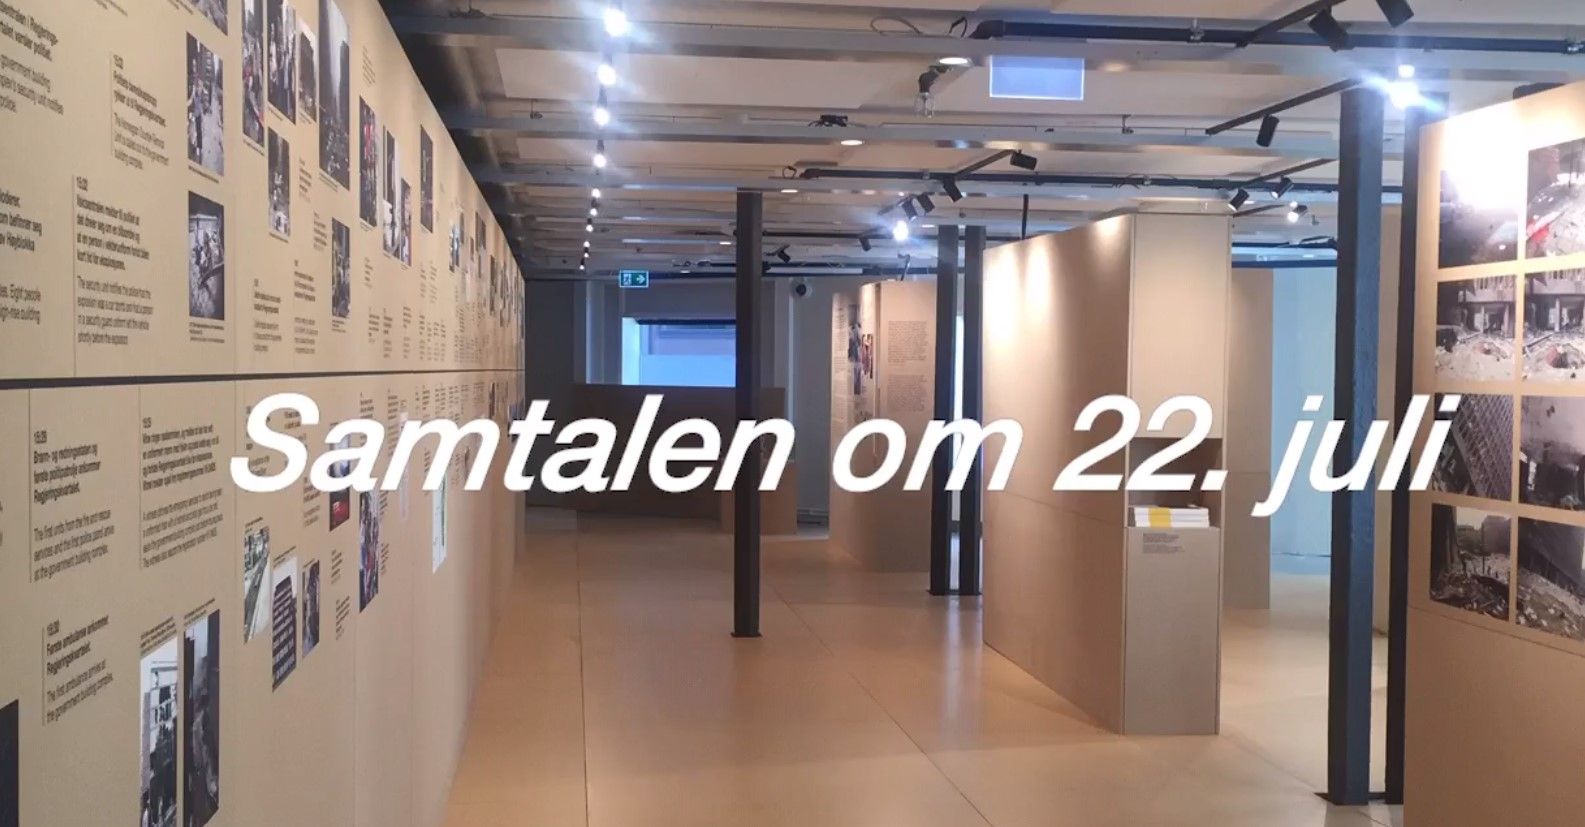 Image of exhibition area with overlay text "Conversation on 22 July"